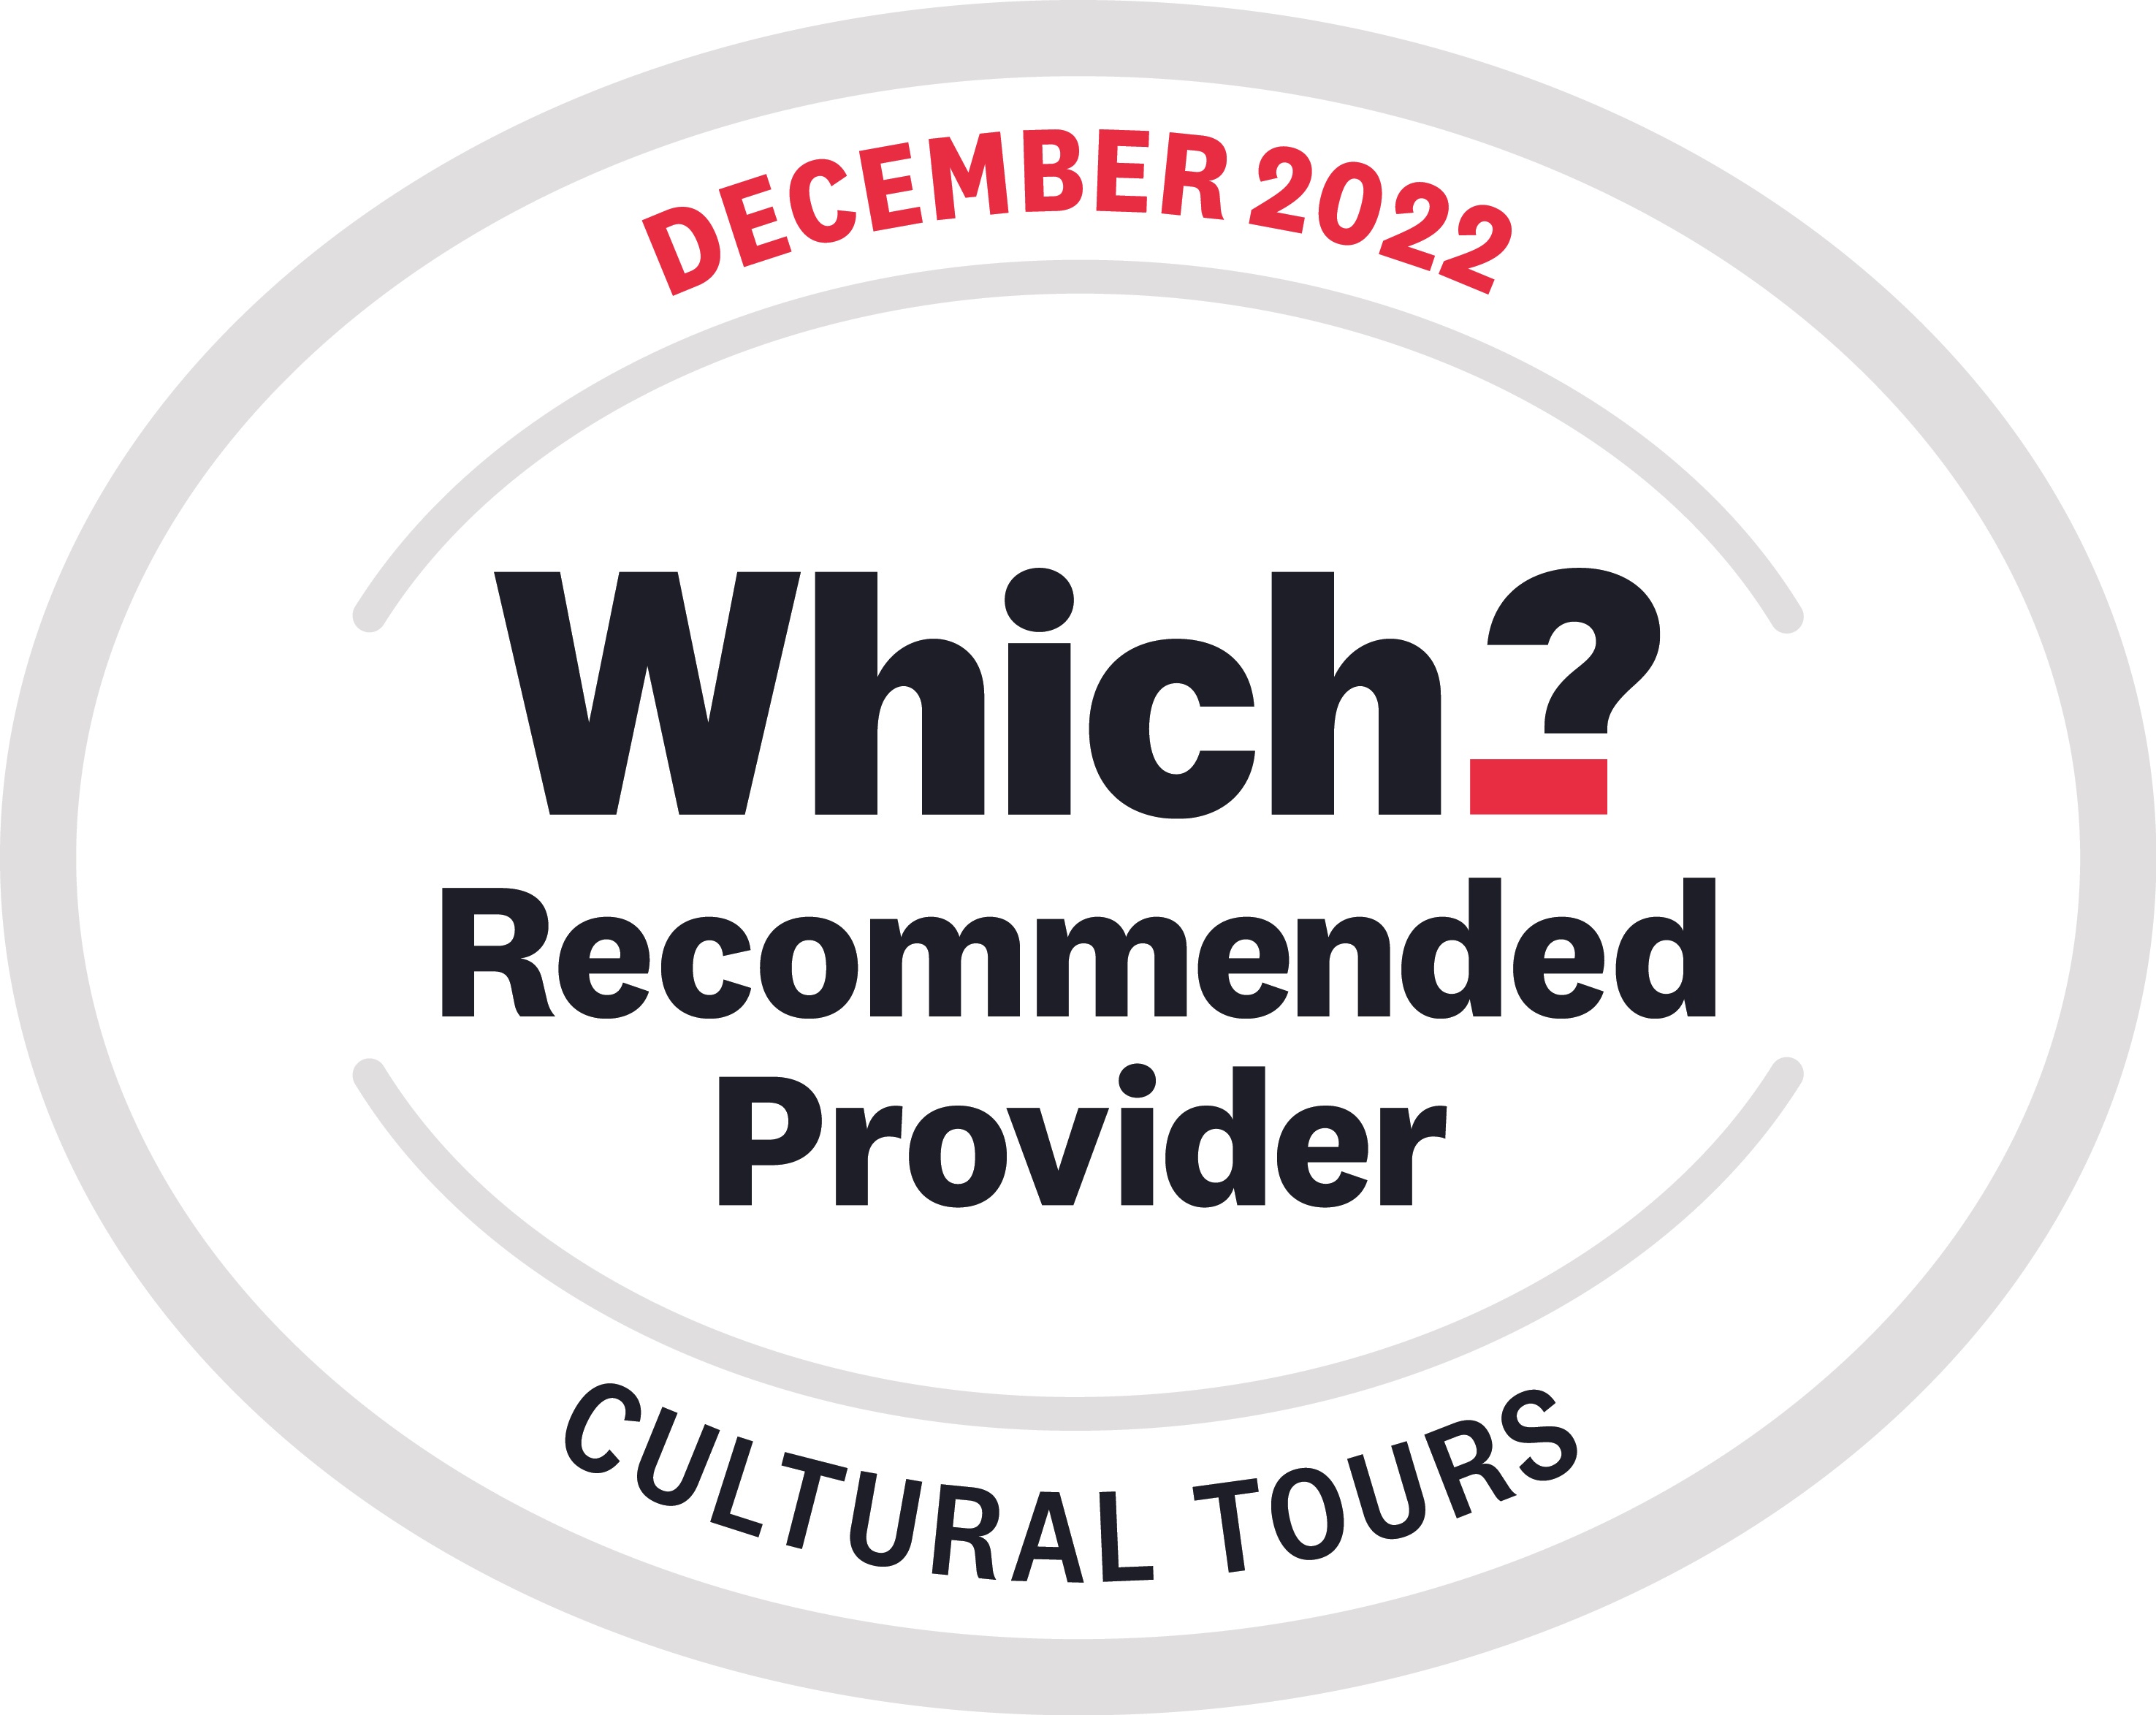 Which? Recommended Provider for Cultural Tours 2022